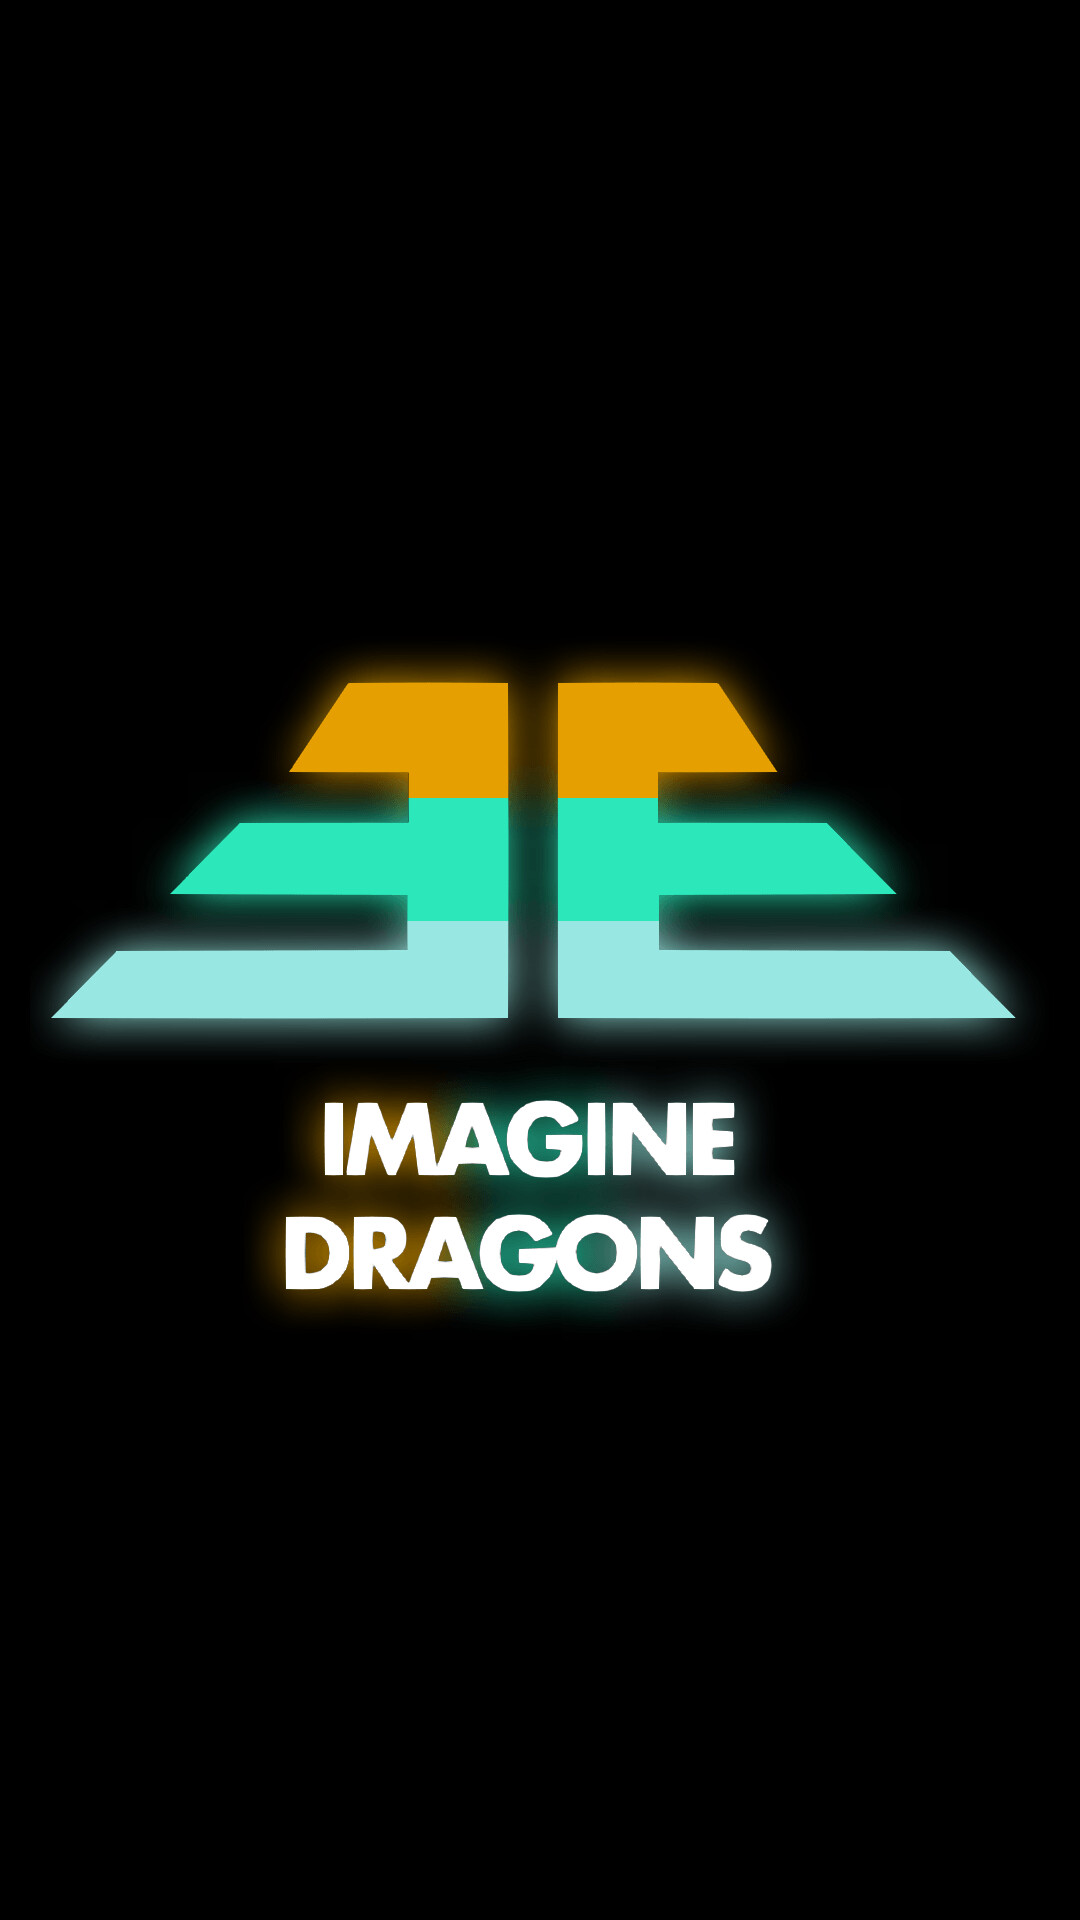 Imagine Dragons: "Lonely" was sent to Italian radio on September 24, 2021. 1080x1920 Full HD Background.